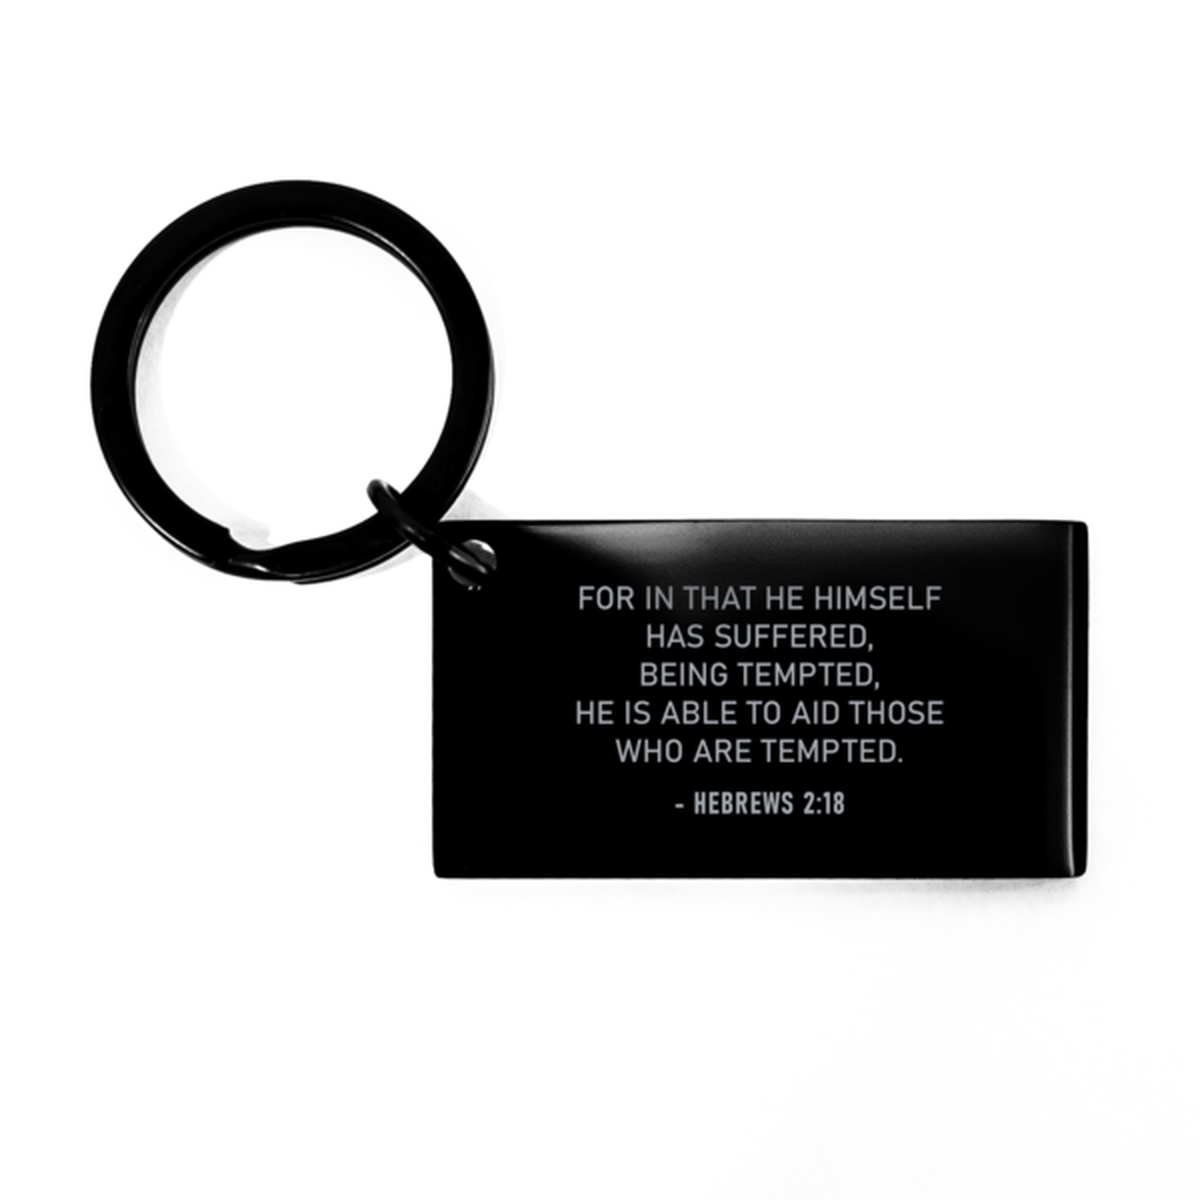 Bible Verse Black Keychain, Hebrews 2:18 For In That He Himself Has Suffered, Being, Christian Inspirational Key Ring Gifts For Men Women